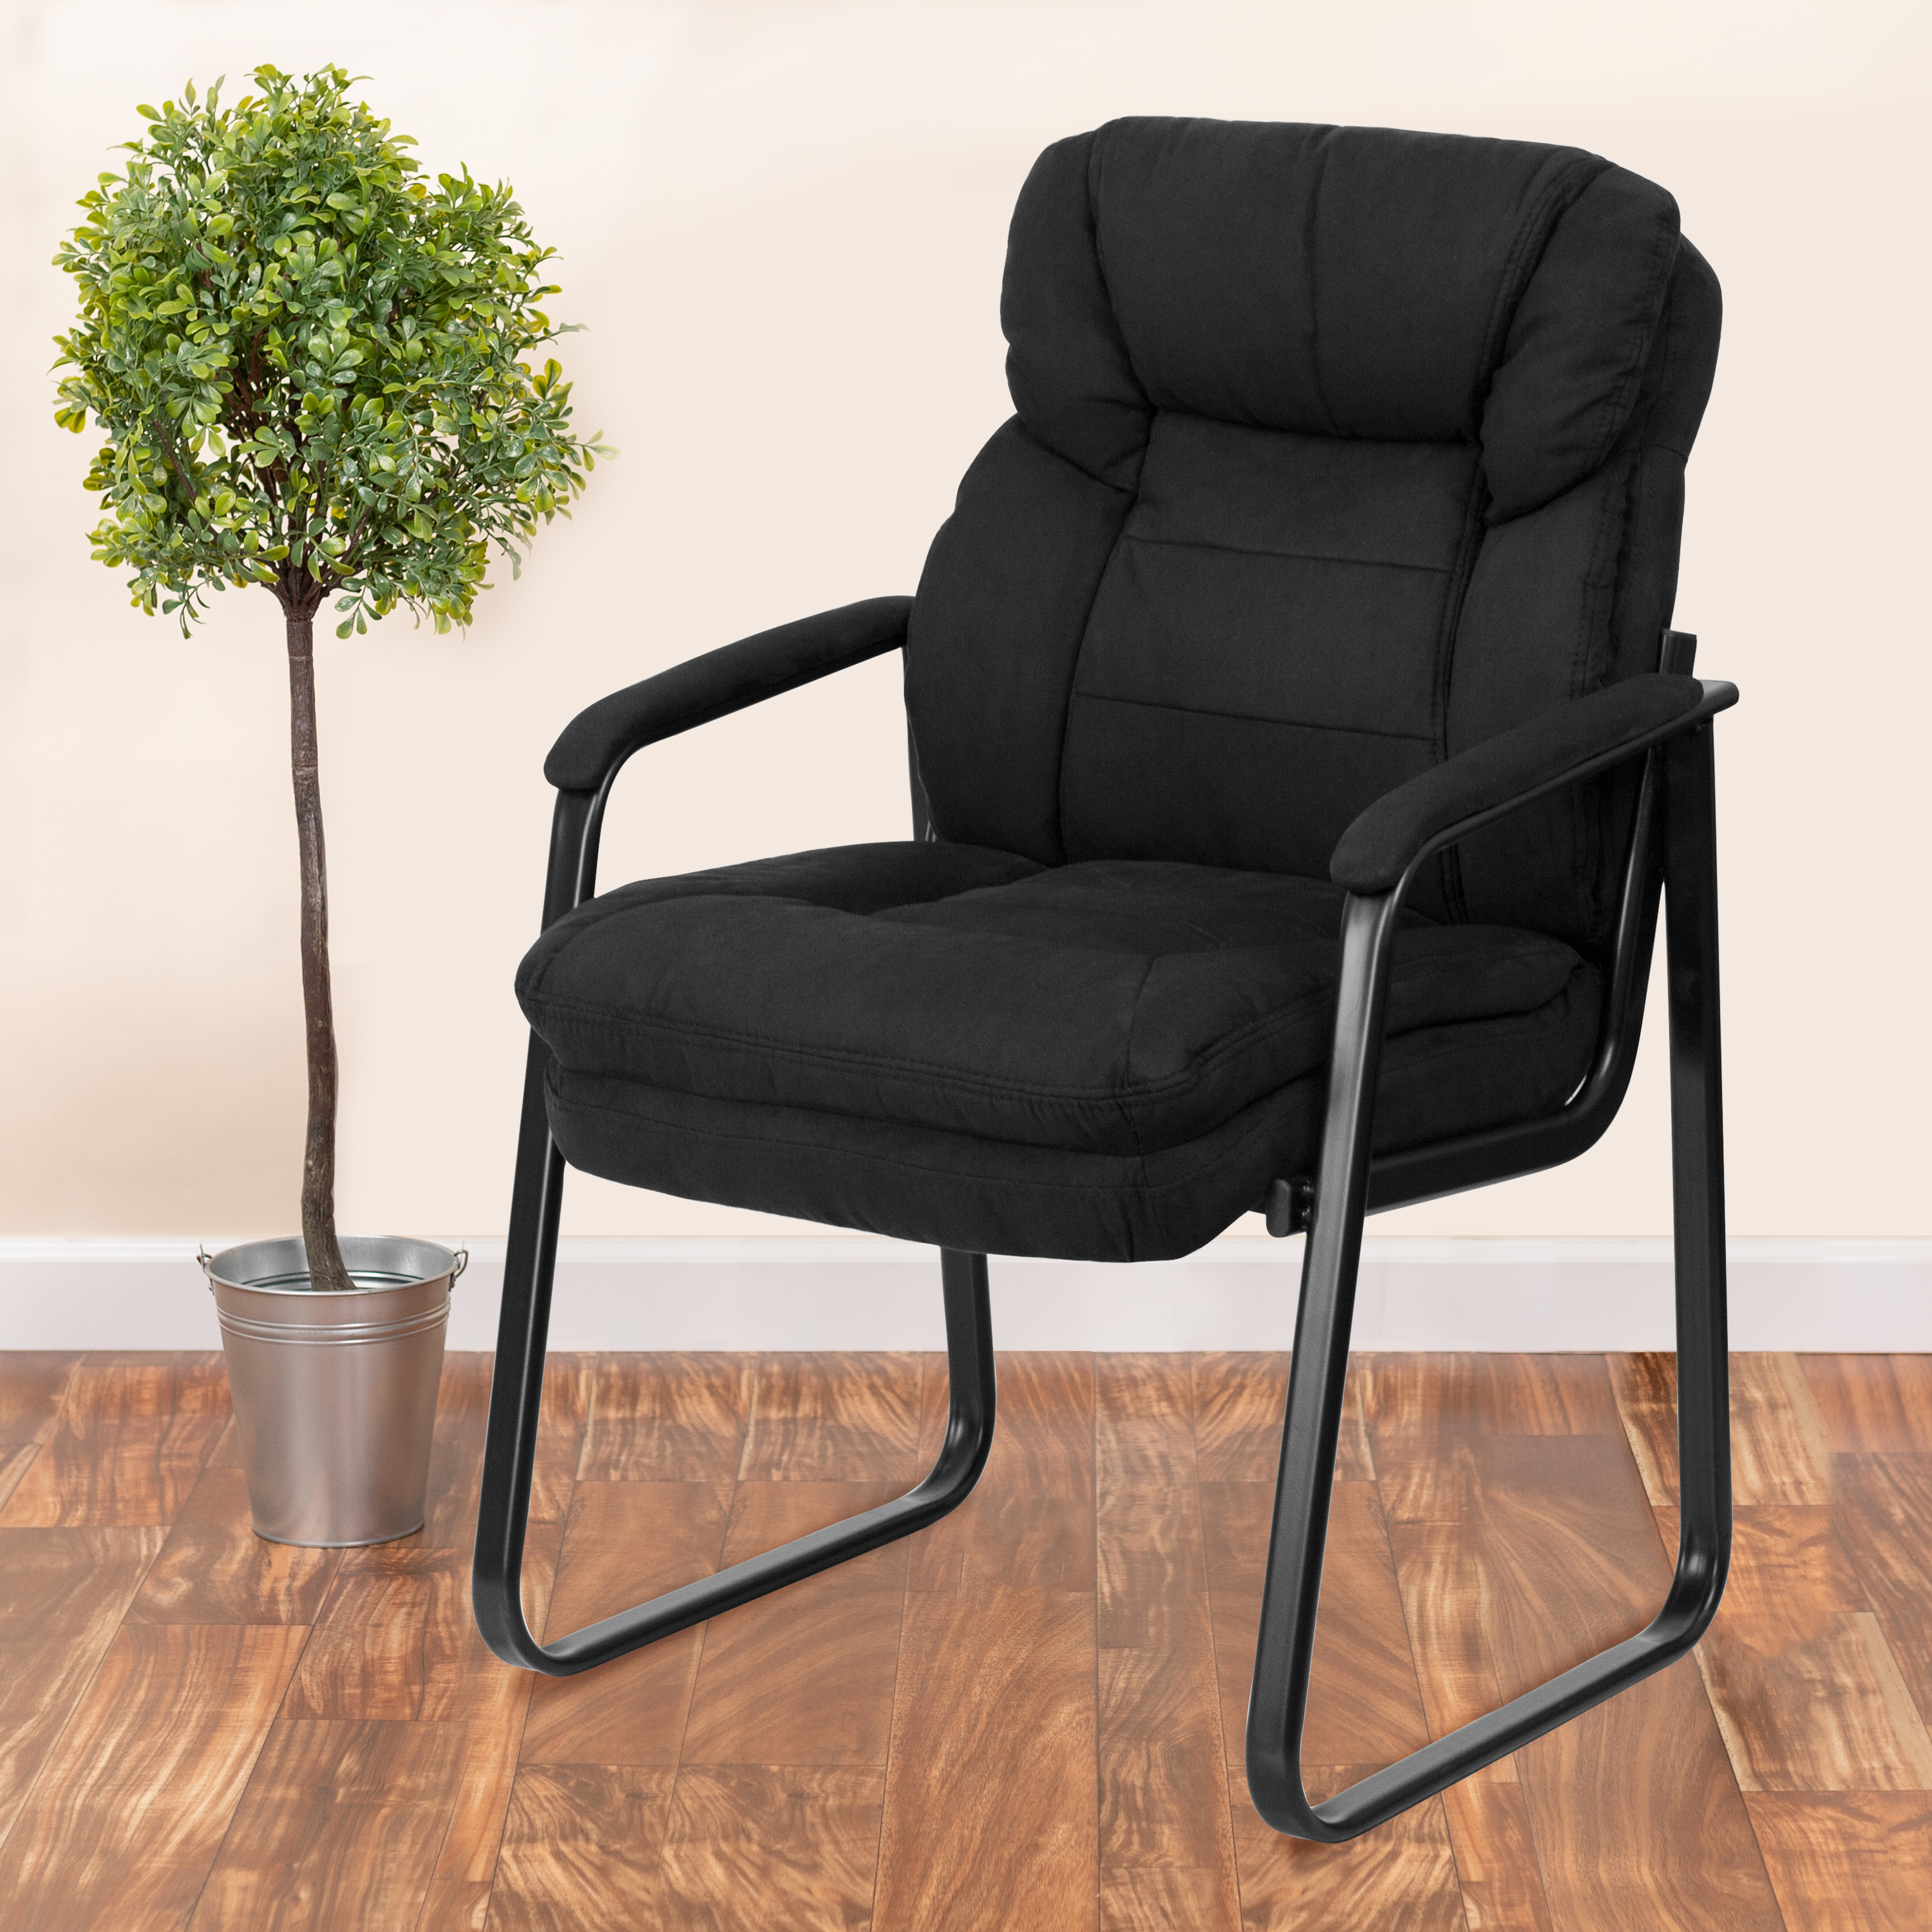 Flash Furniture Isla Black Microfiber Executive Side Reception Chair with Lumbar Support and Sled Base - image 2 of 6